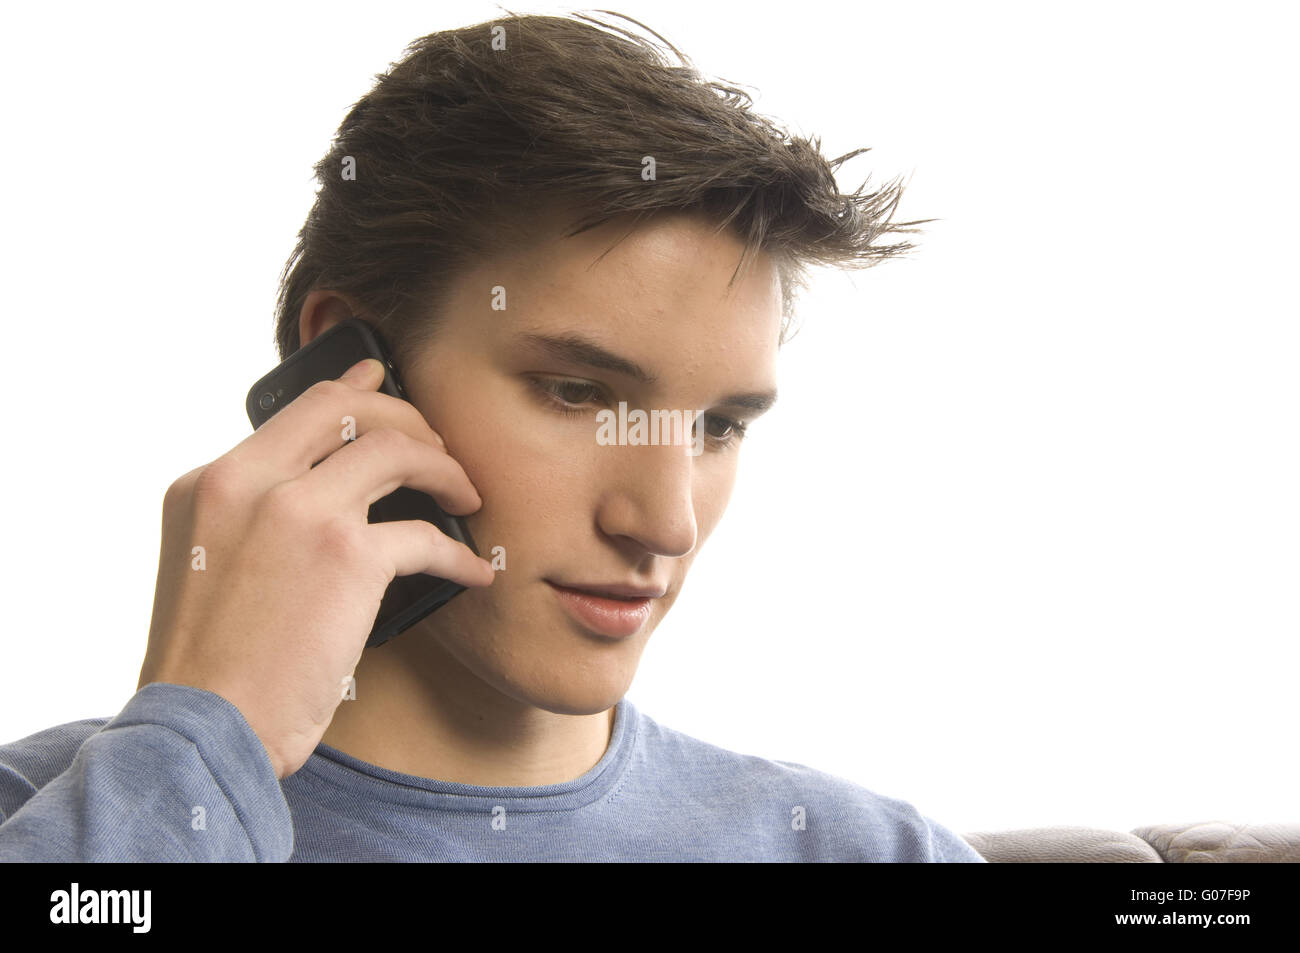 man with cellular phone Stock Photo